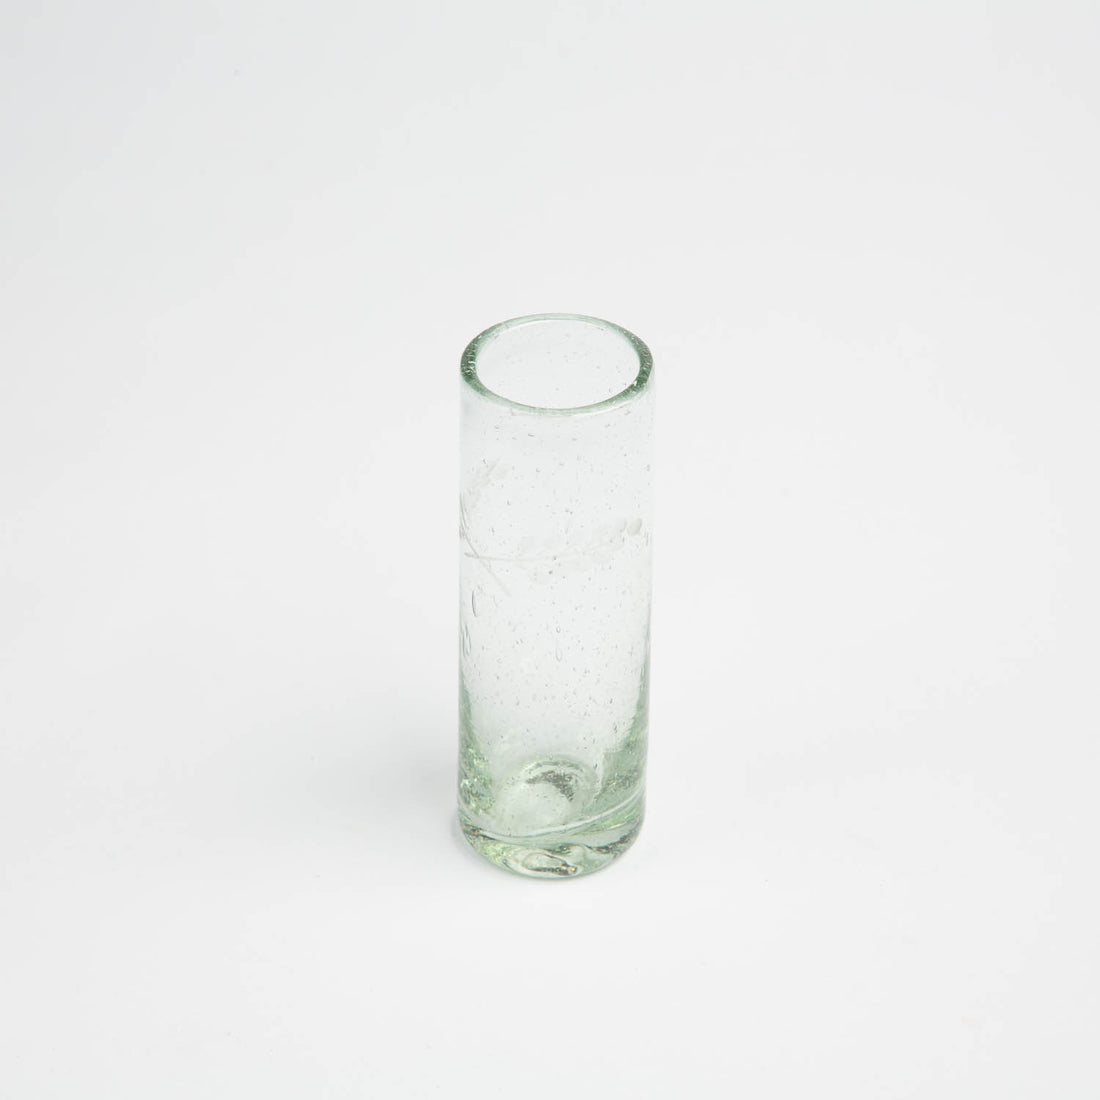 Etched Blown Glass, Tall Shot Glass